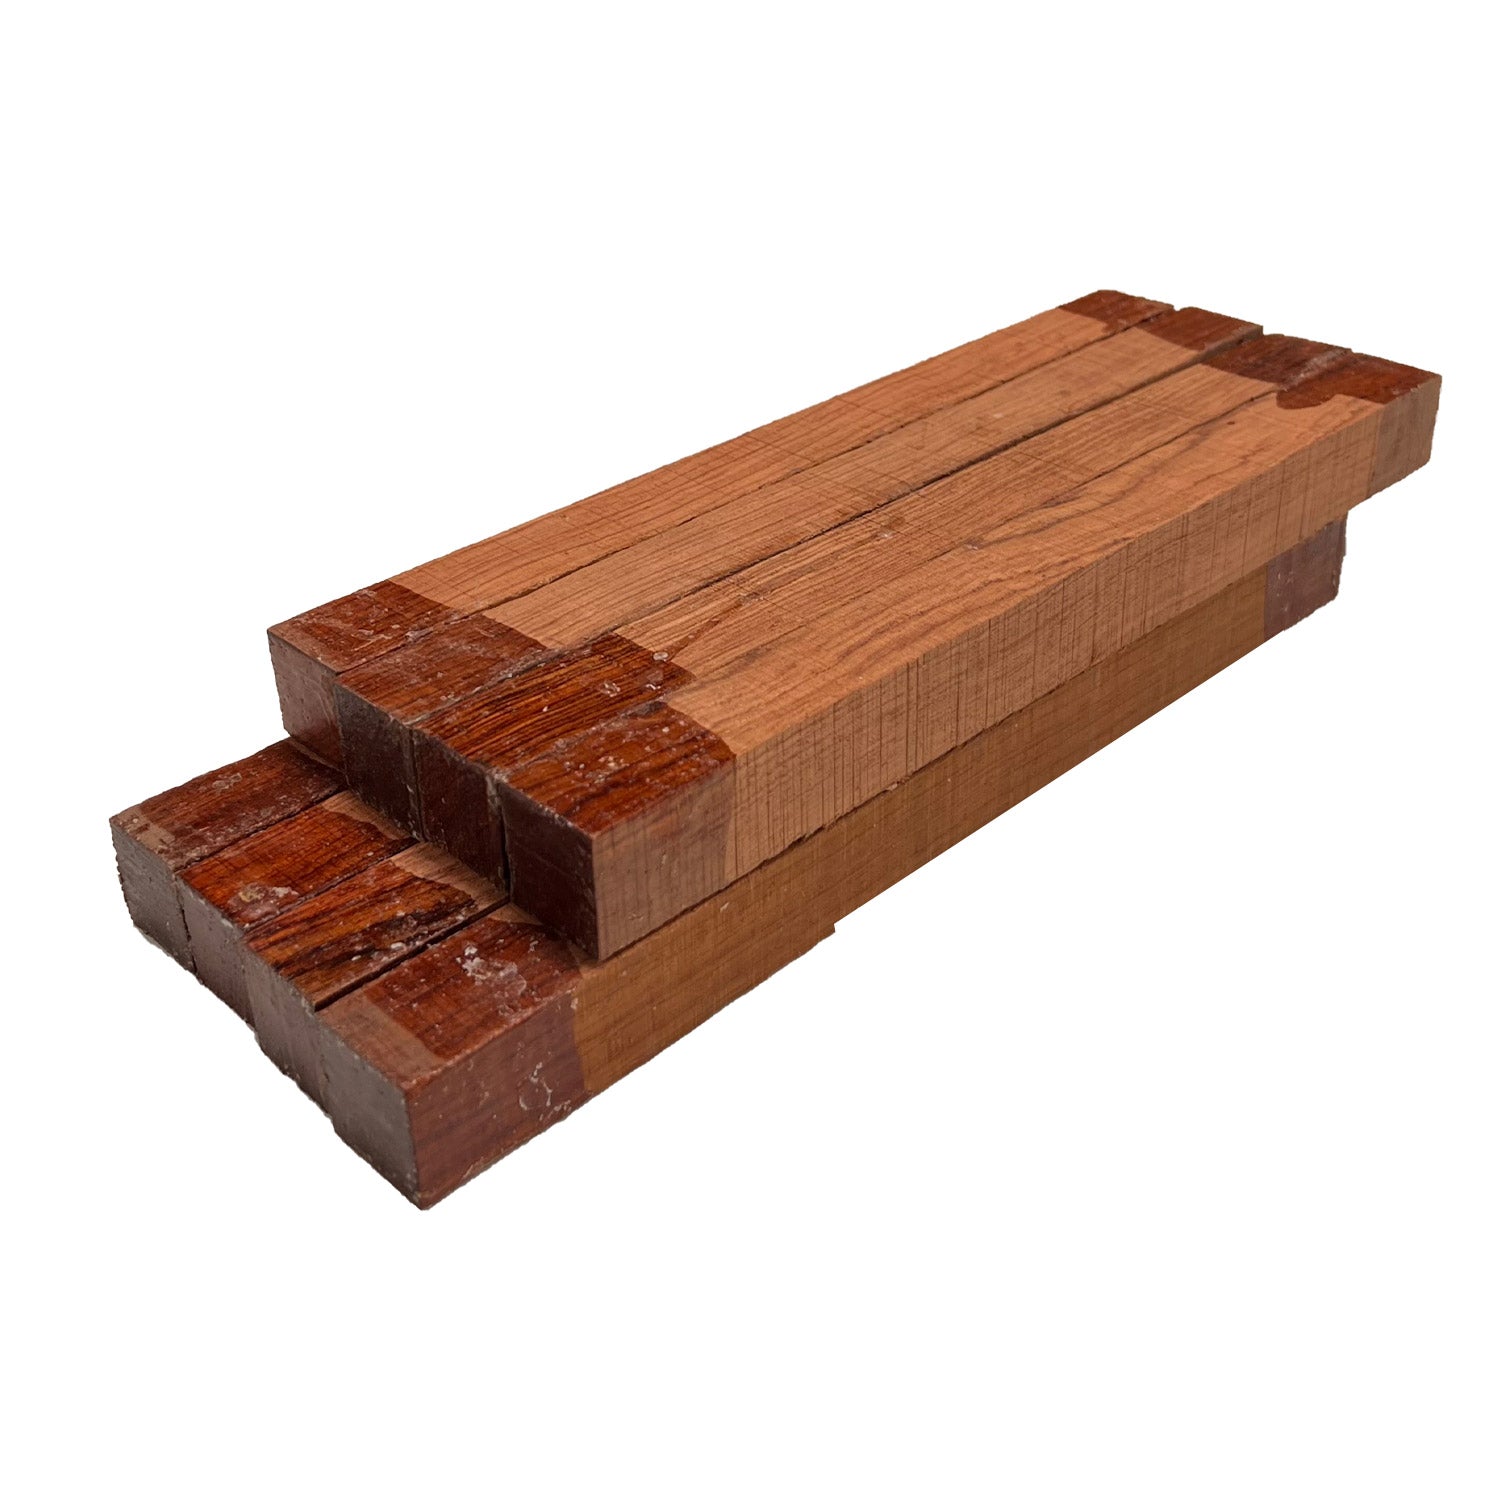 Pack Of 8 Bubing Hardwood Turning Square Wood Blanks 1 x 1 x 12 inches - Exotic Wood Zone - Buy online Across USA 